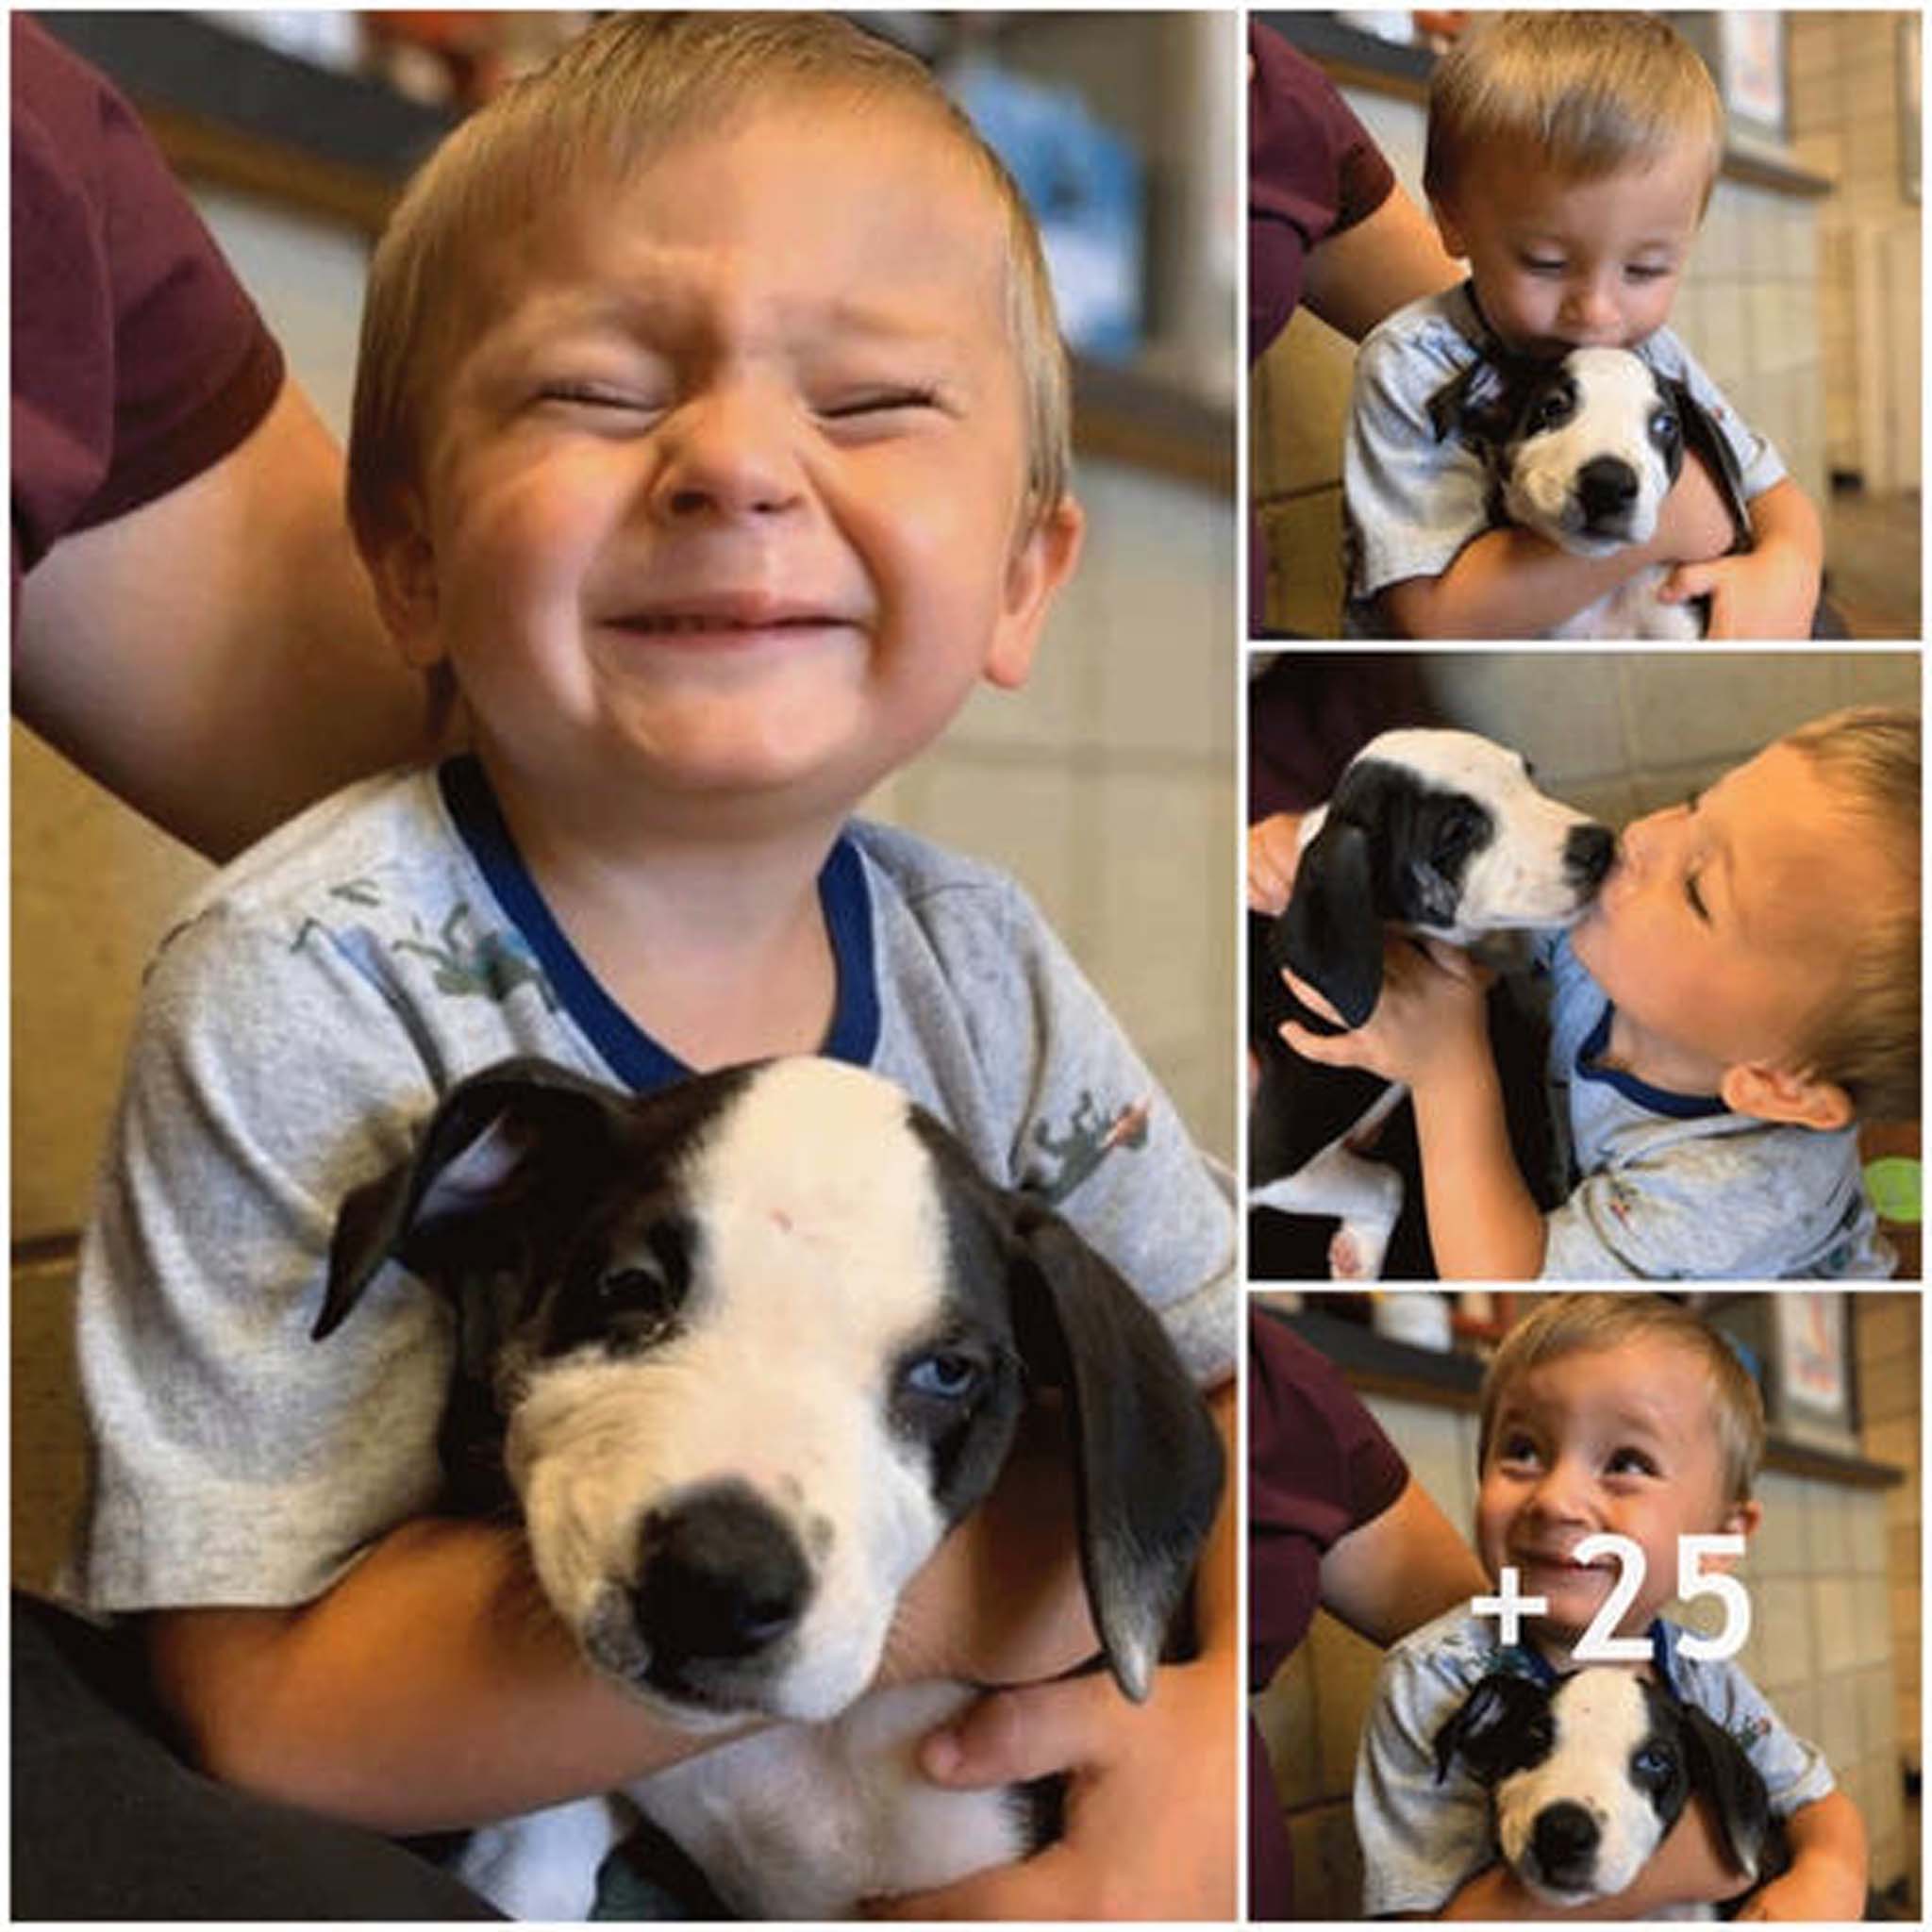 To find optimism and empathy in each other, the boy with a cleft lip adopts a dog with a cleft lip like him.